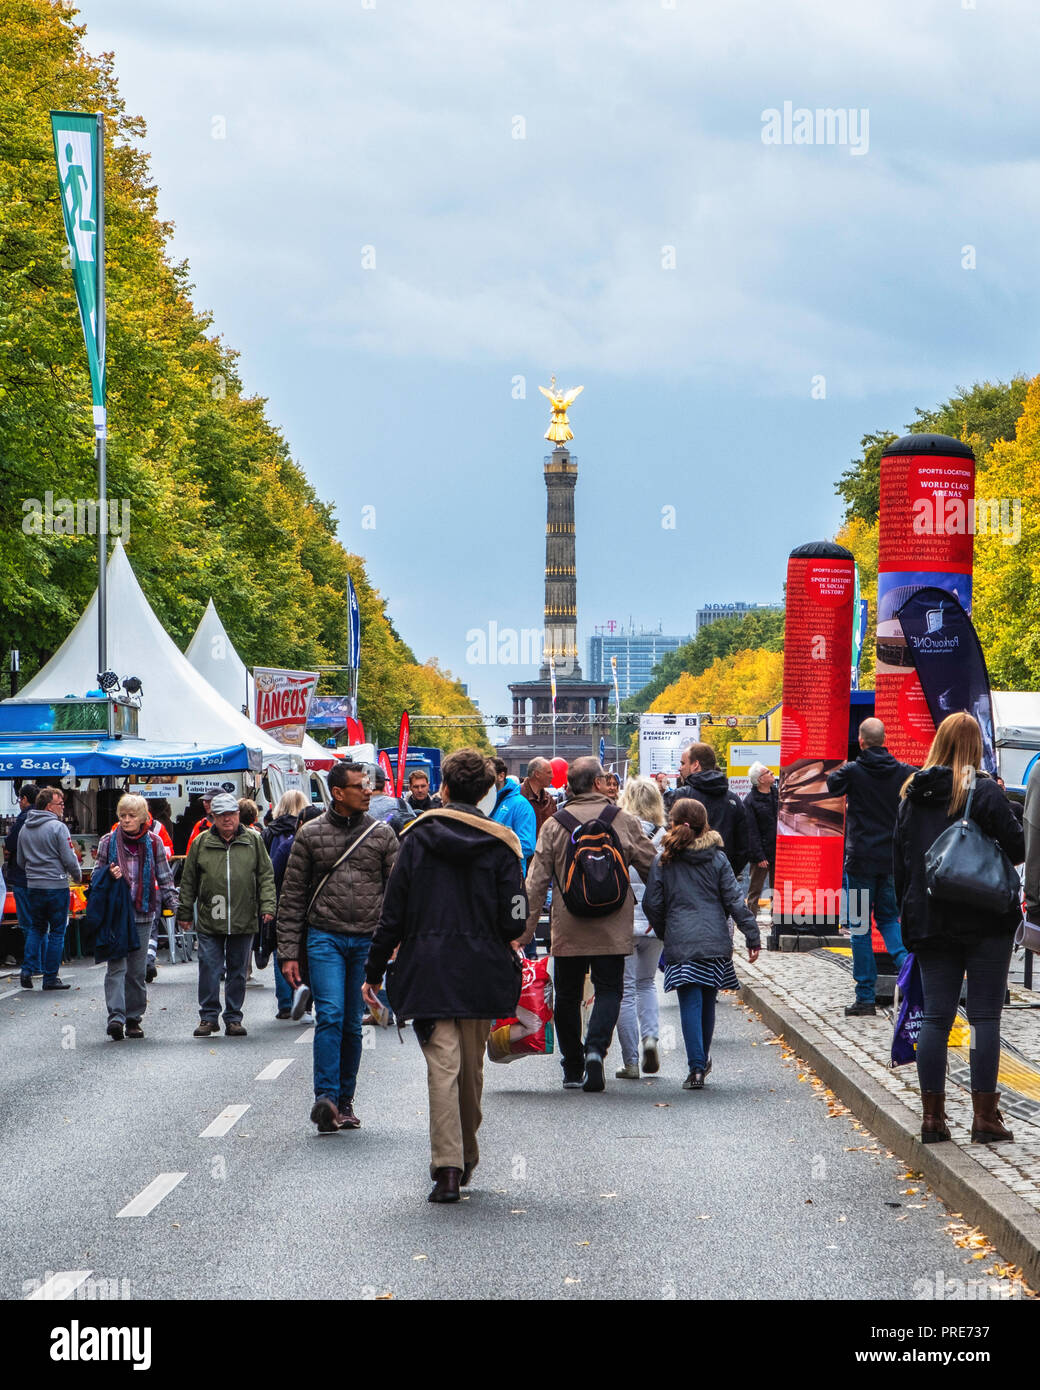 Germany, Berlin, Mitte, 1-3 October 2018. The Day of German Unity, Tag der Deutschen Einheit on the 3rd October is Germany's national holiday. It commemorates the German reunification in 1990 after the fall of the Berlin Wall and is being celebrated with a 3-day festival around Platz der Republik, Straße des 17. Juni and Brandenburg Gate. The day is being hosted by the State of Berlin this year as part of its Federal Council Presidency. The motto is ‘only with you’, ‘Nur mit euch’ and is a celebration of democracy and freedom. The festival is taking place from 1-3 October and will be celebrate Stock Photo